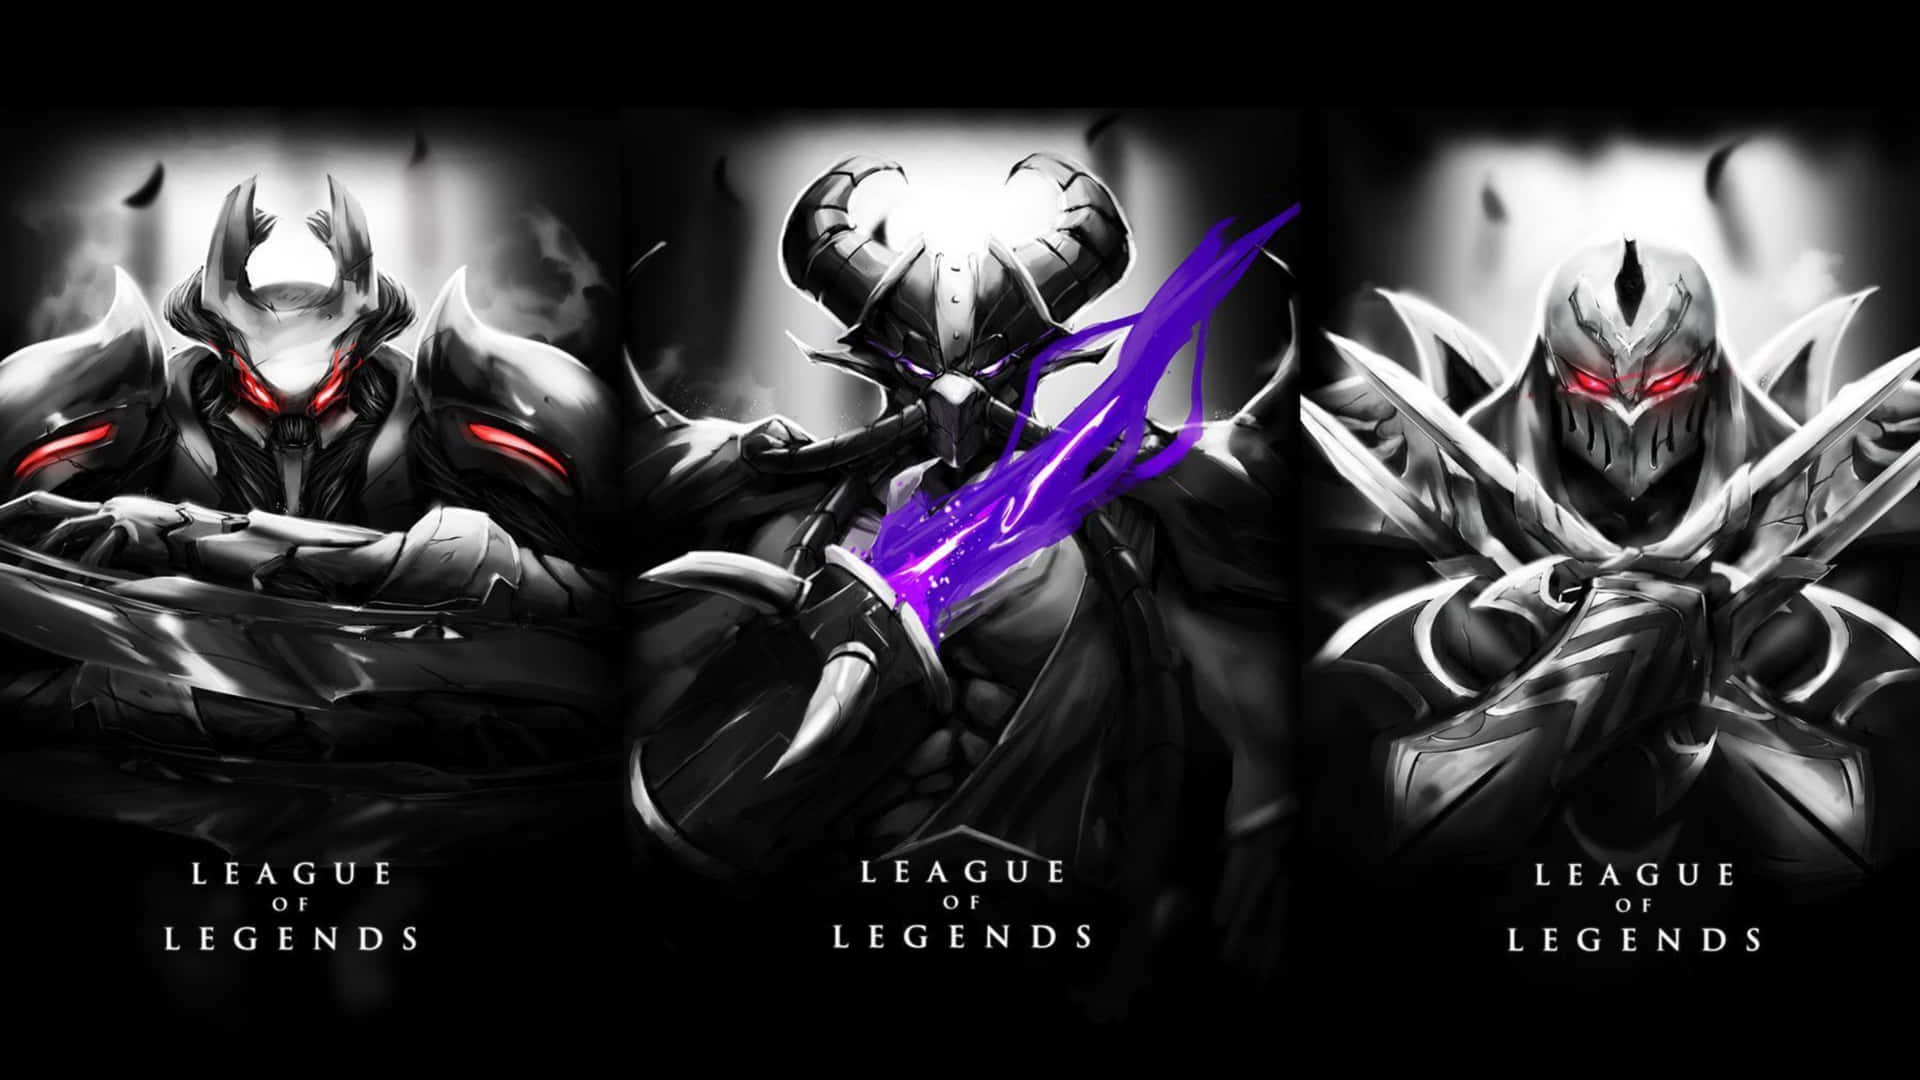 Summon your team and join the 4K League of Legends battle!